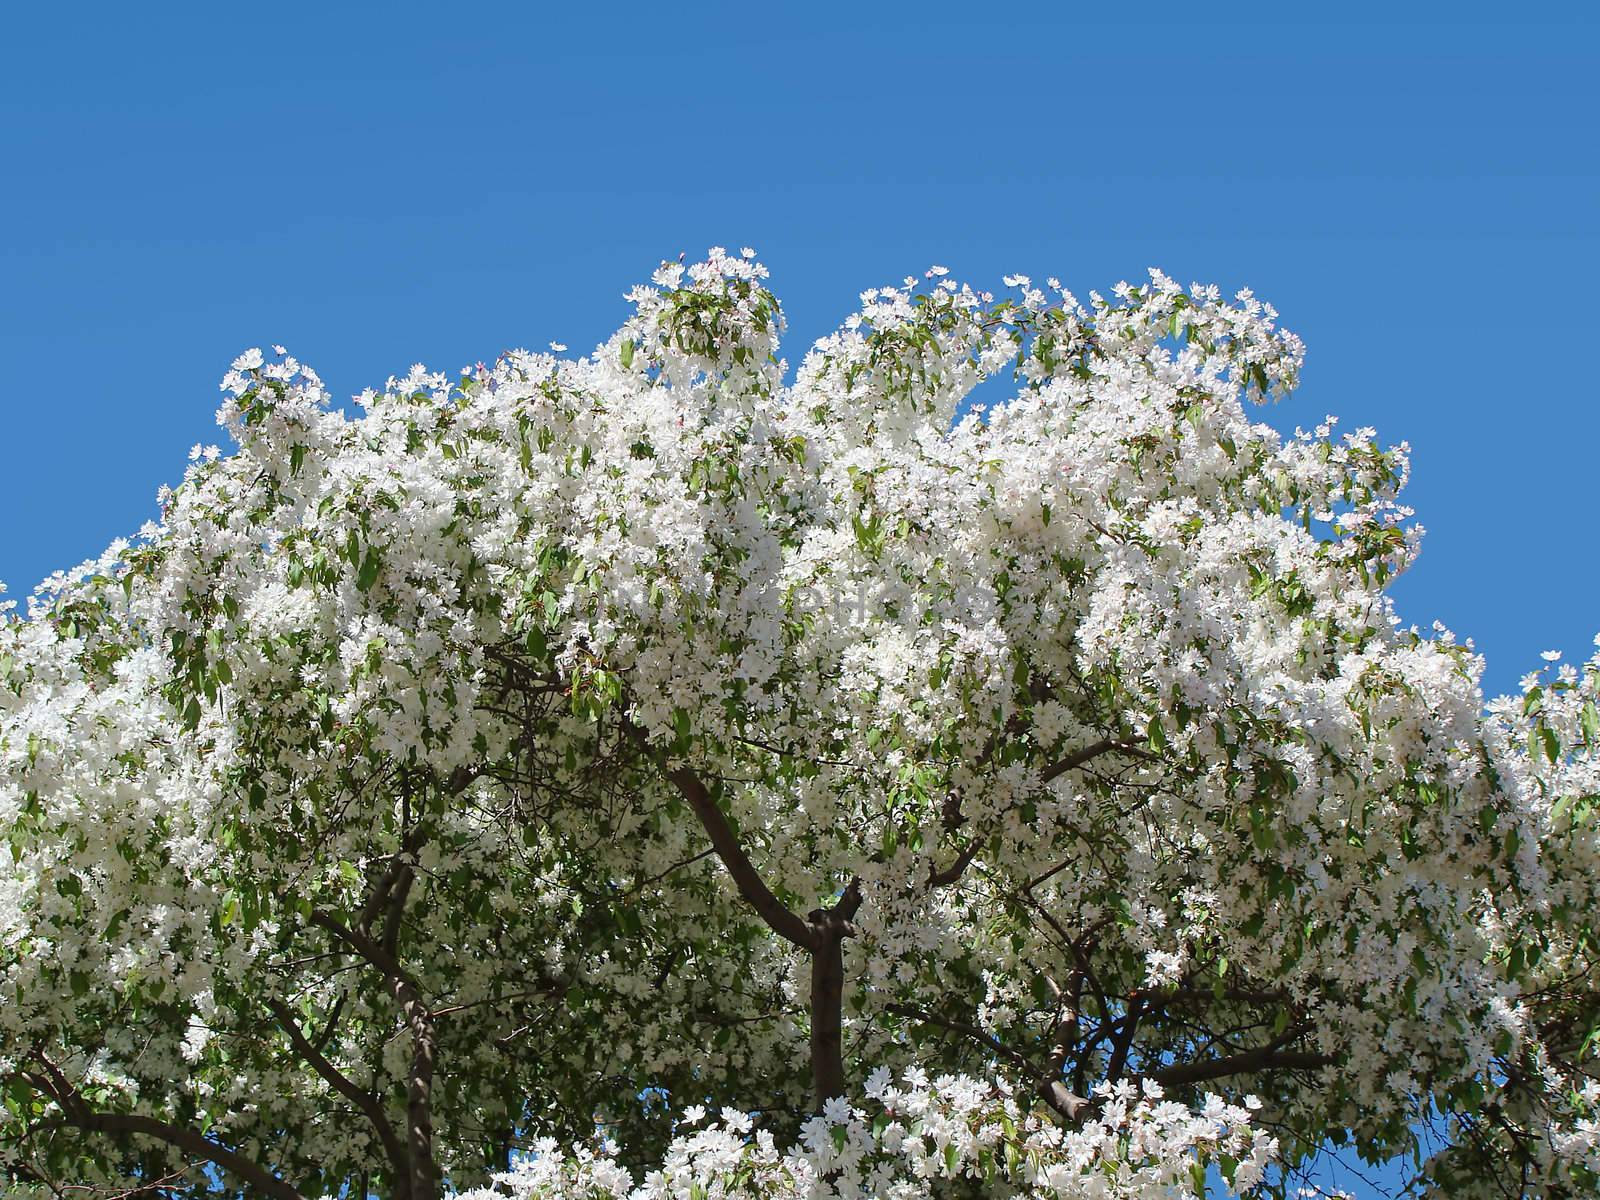 White flowers bloom on a tree against a bright blue sky.